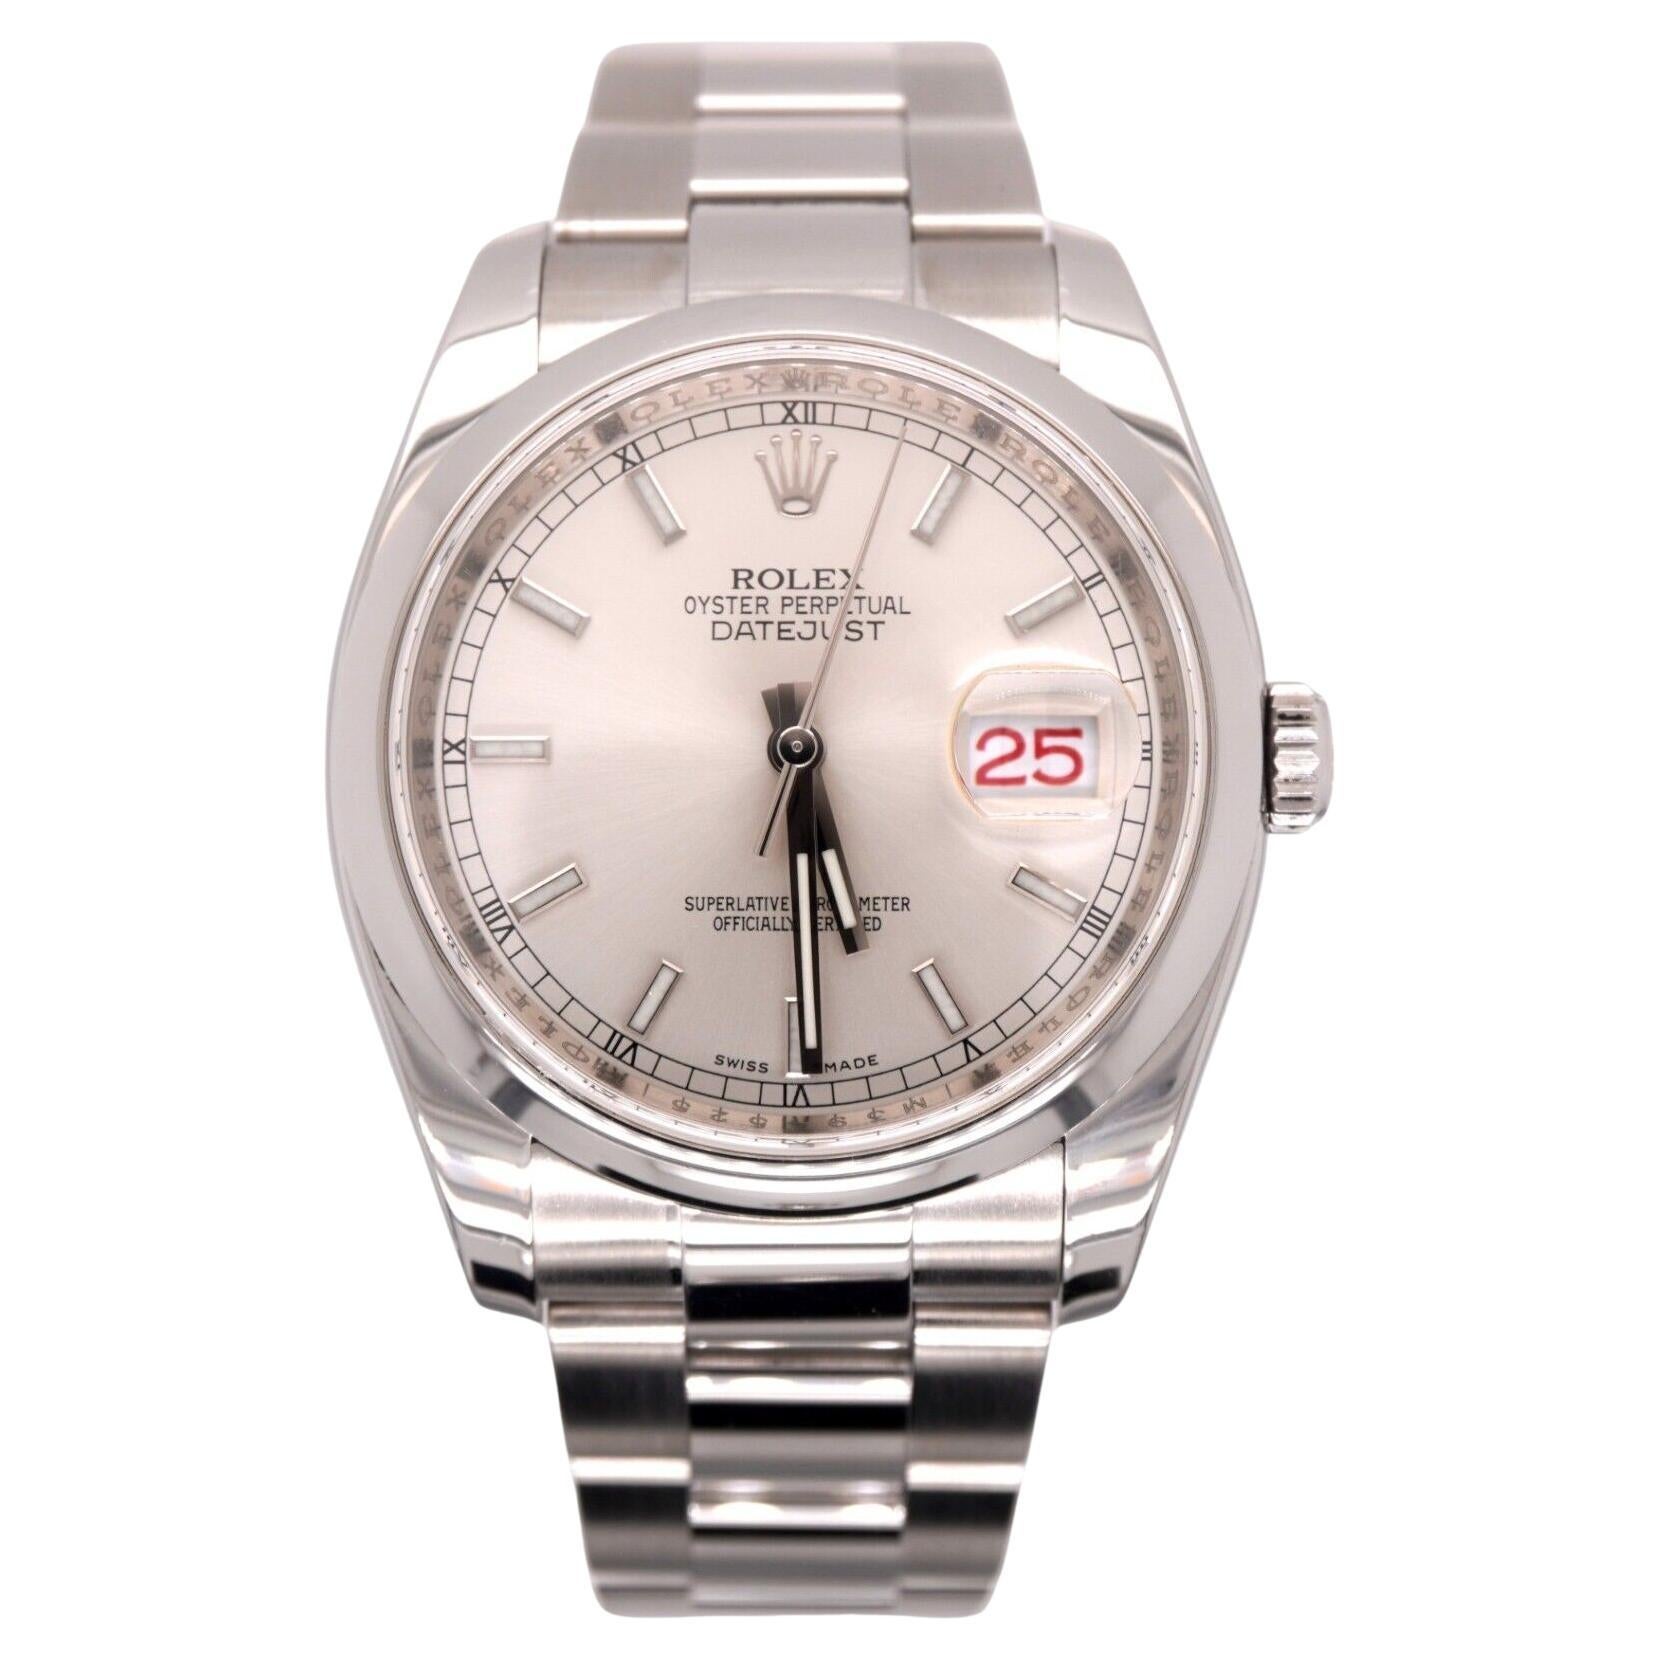 Rolex Datejust 36mm Mens Stainless Steel Oyster Silver Dial Watch Ref: 116200 For Sale